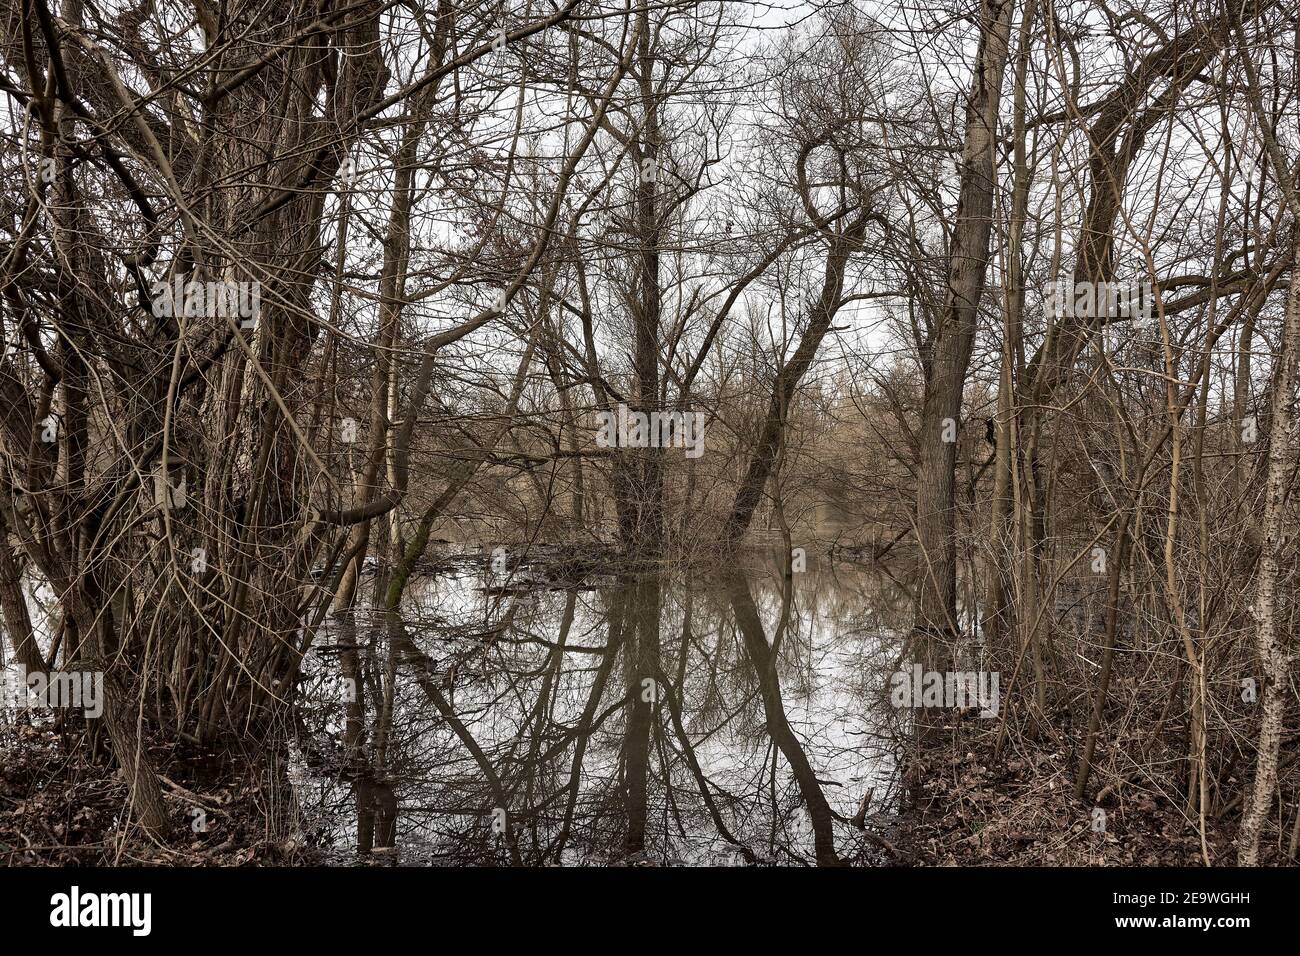 Floodplain riparian forest is flooded by the overflowing of the Altrhein river in Plittersdorf, Germany Stock Photo